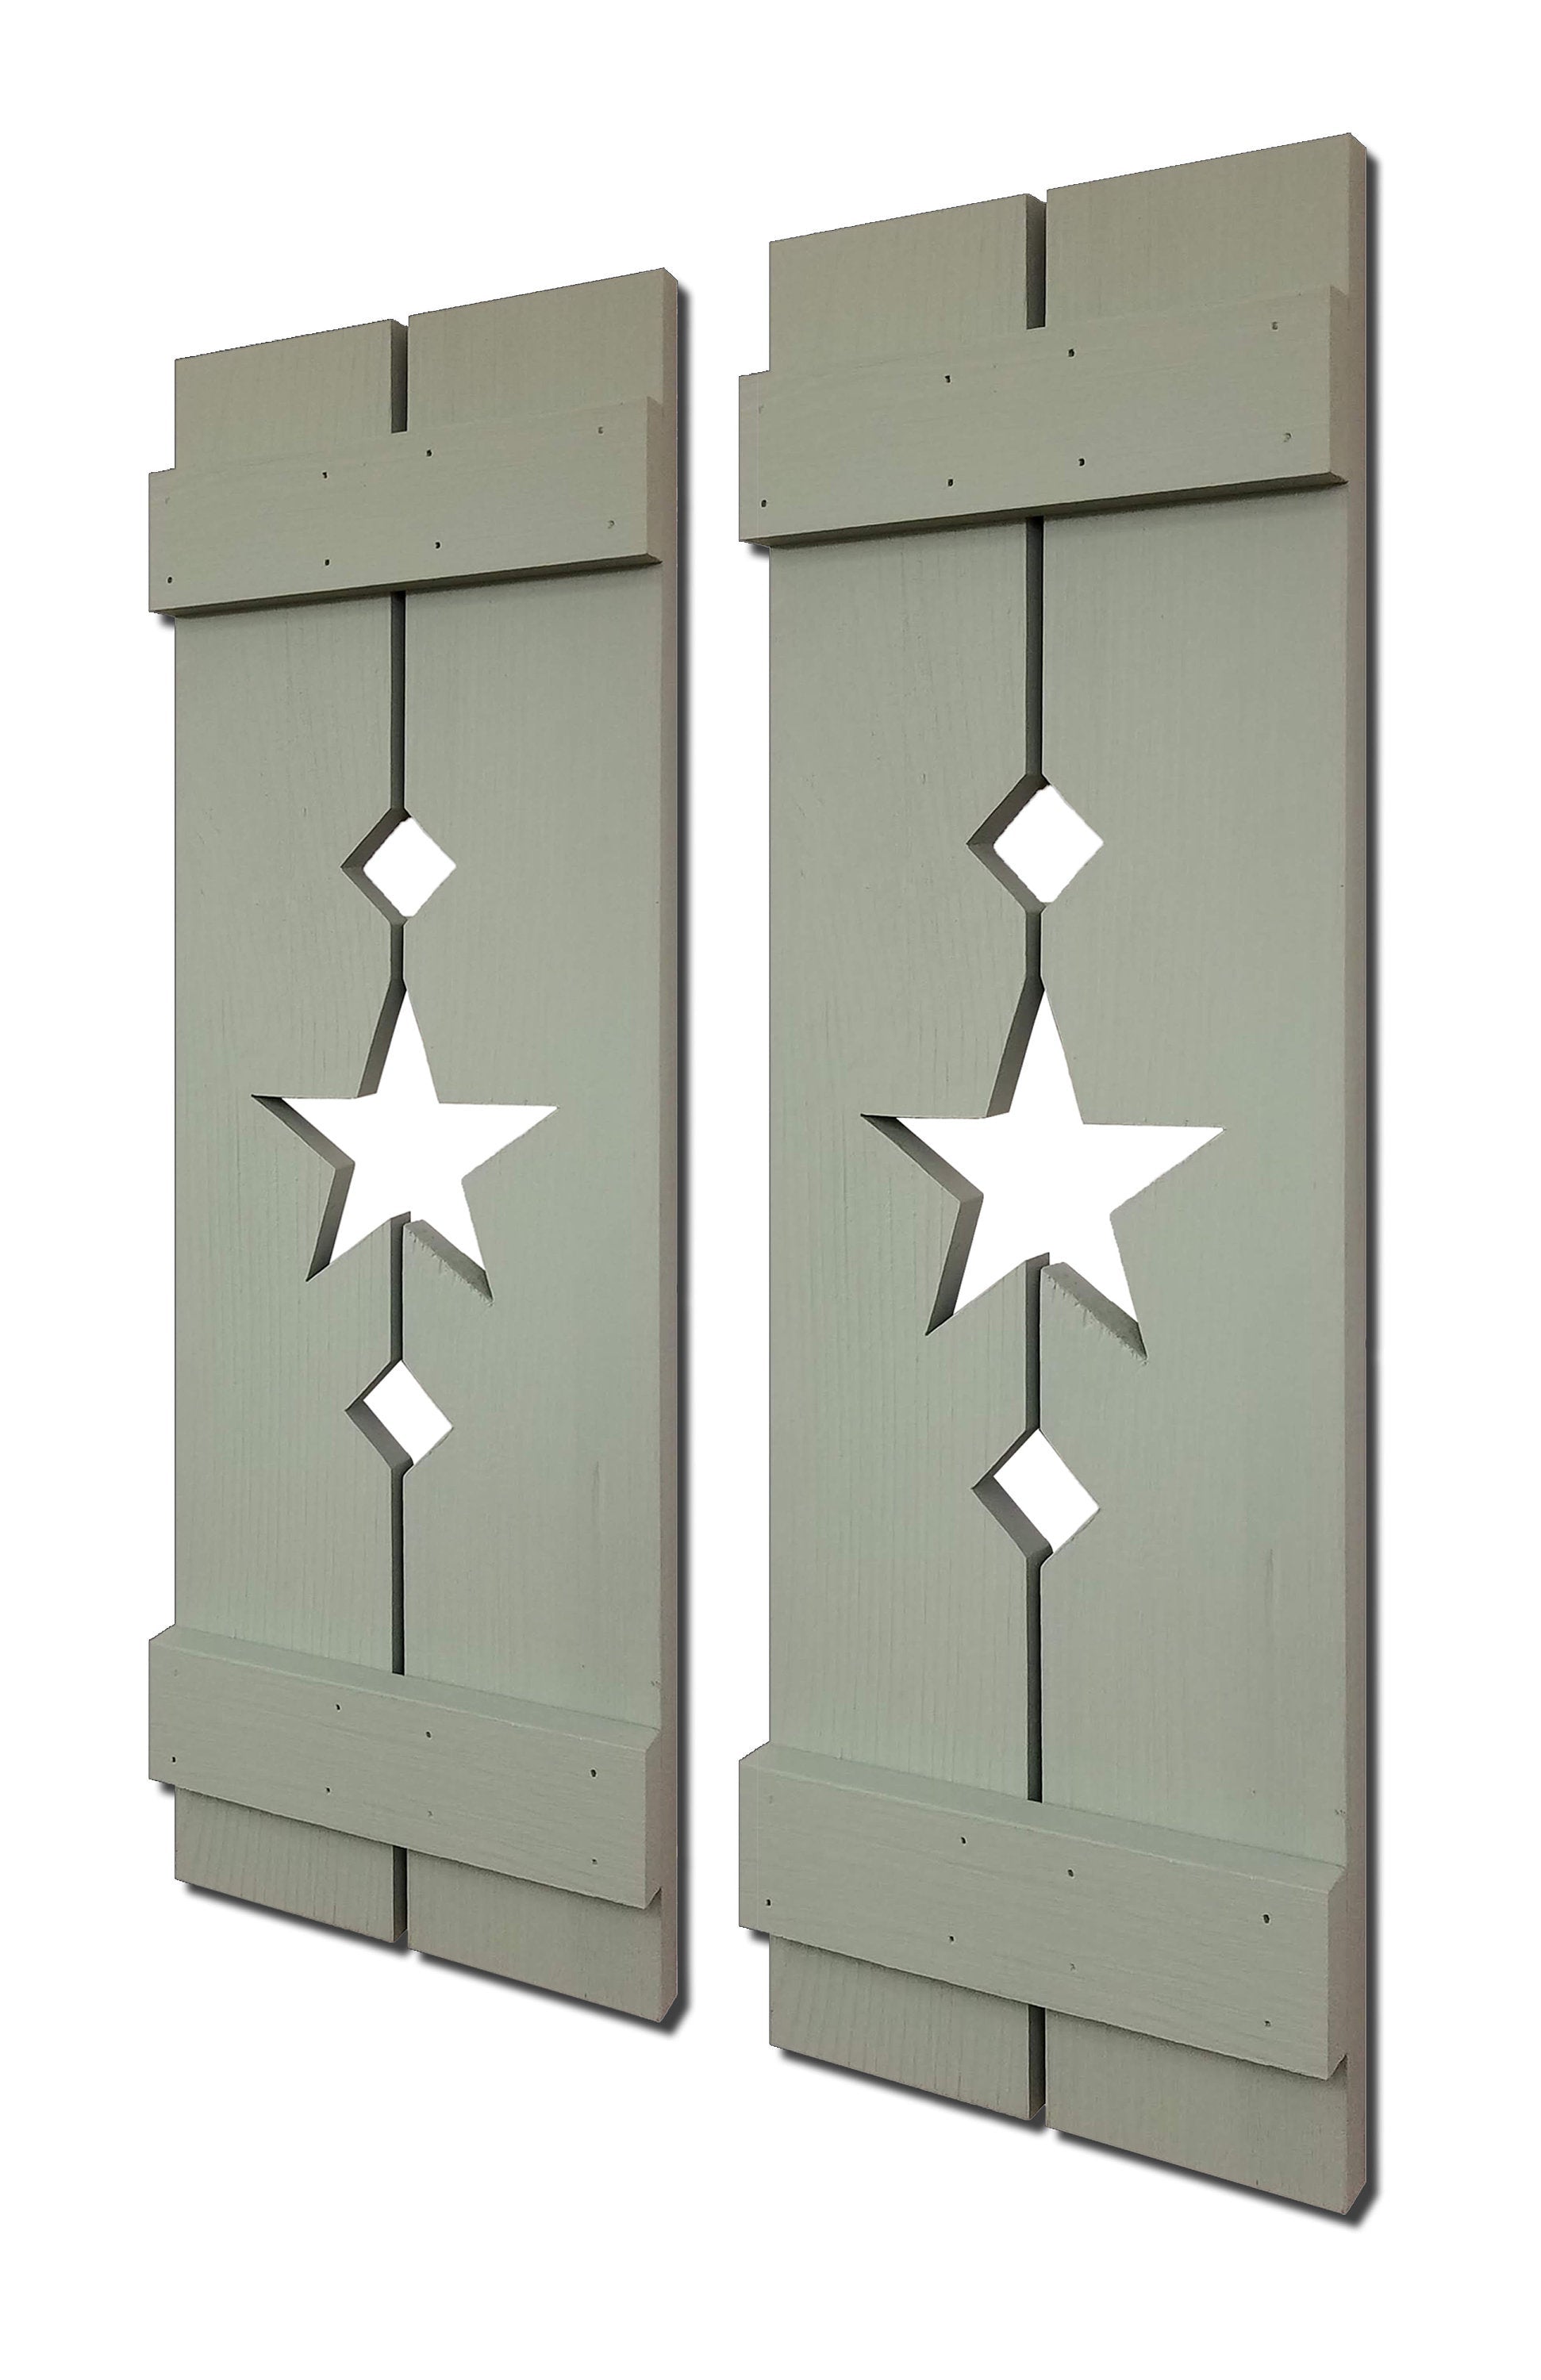 Amish Star Wooden Shutters - 20 Paint Colors, Shown in Avocado Green